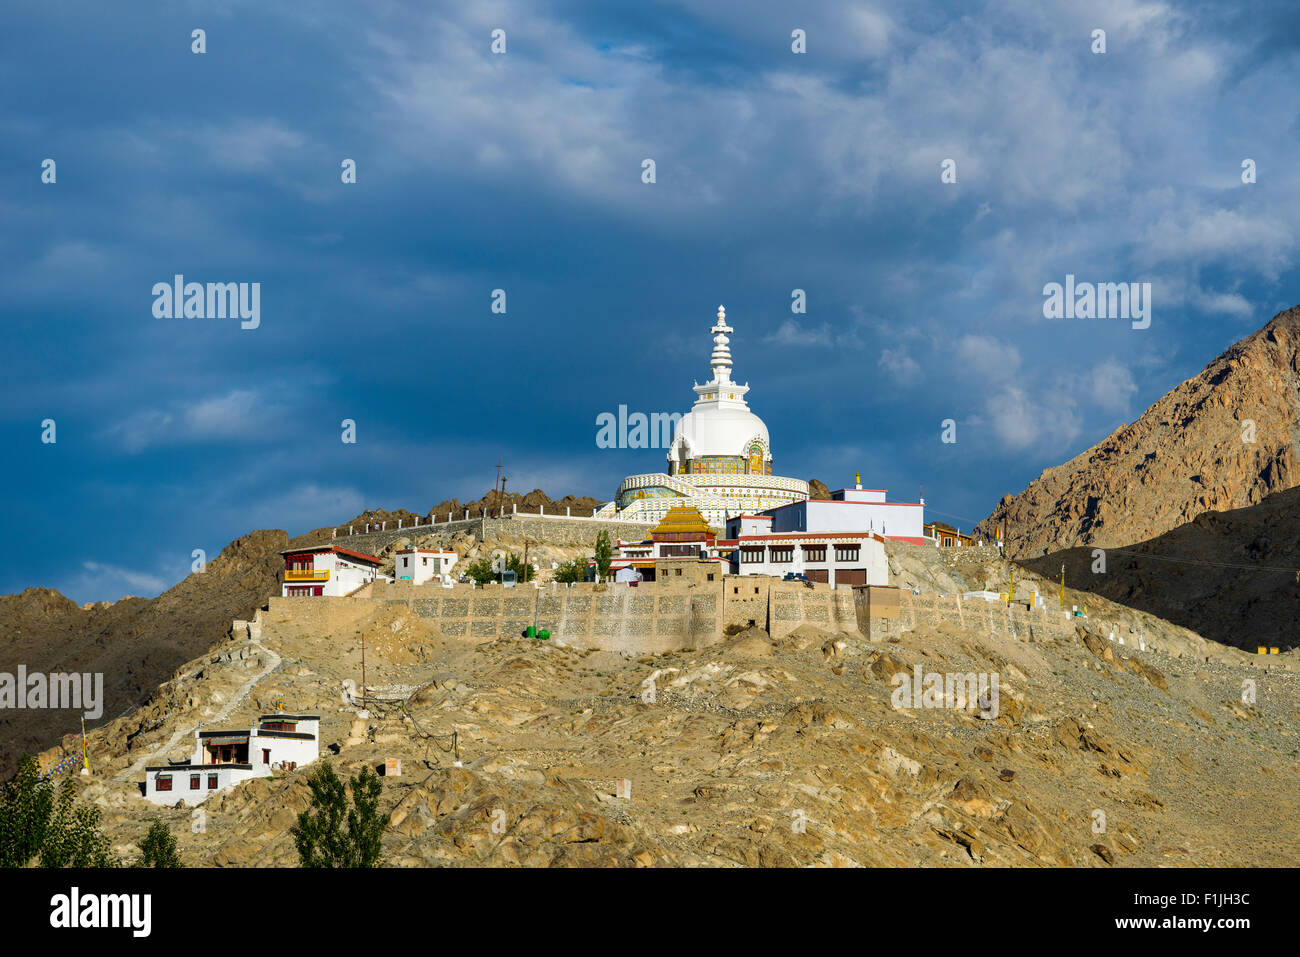 Japanese Stupa, erected in 1991, on a mountain ridge high above the village Changspa, Leh, Jammu and Kashmir, India Stock Photo